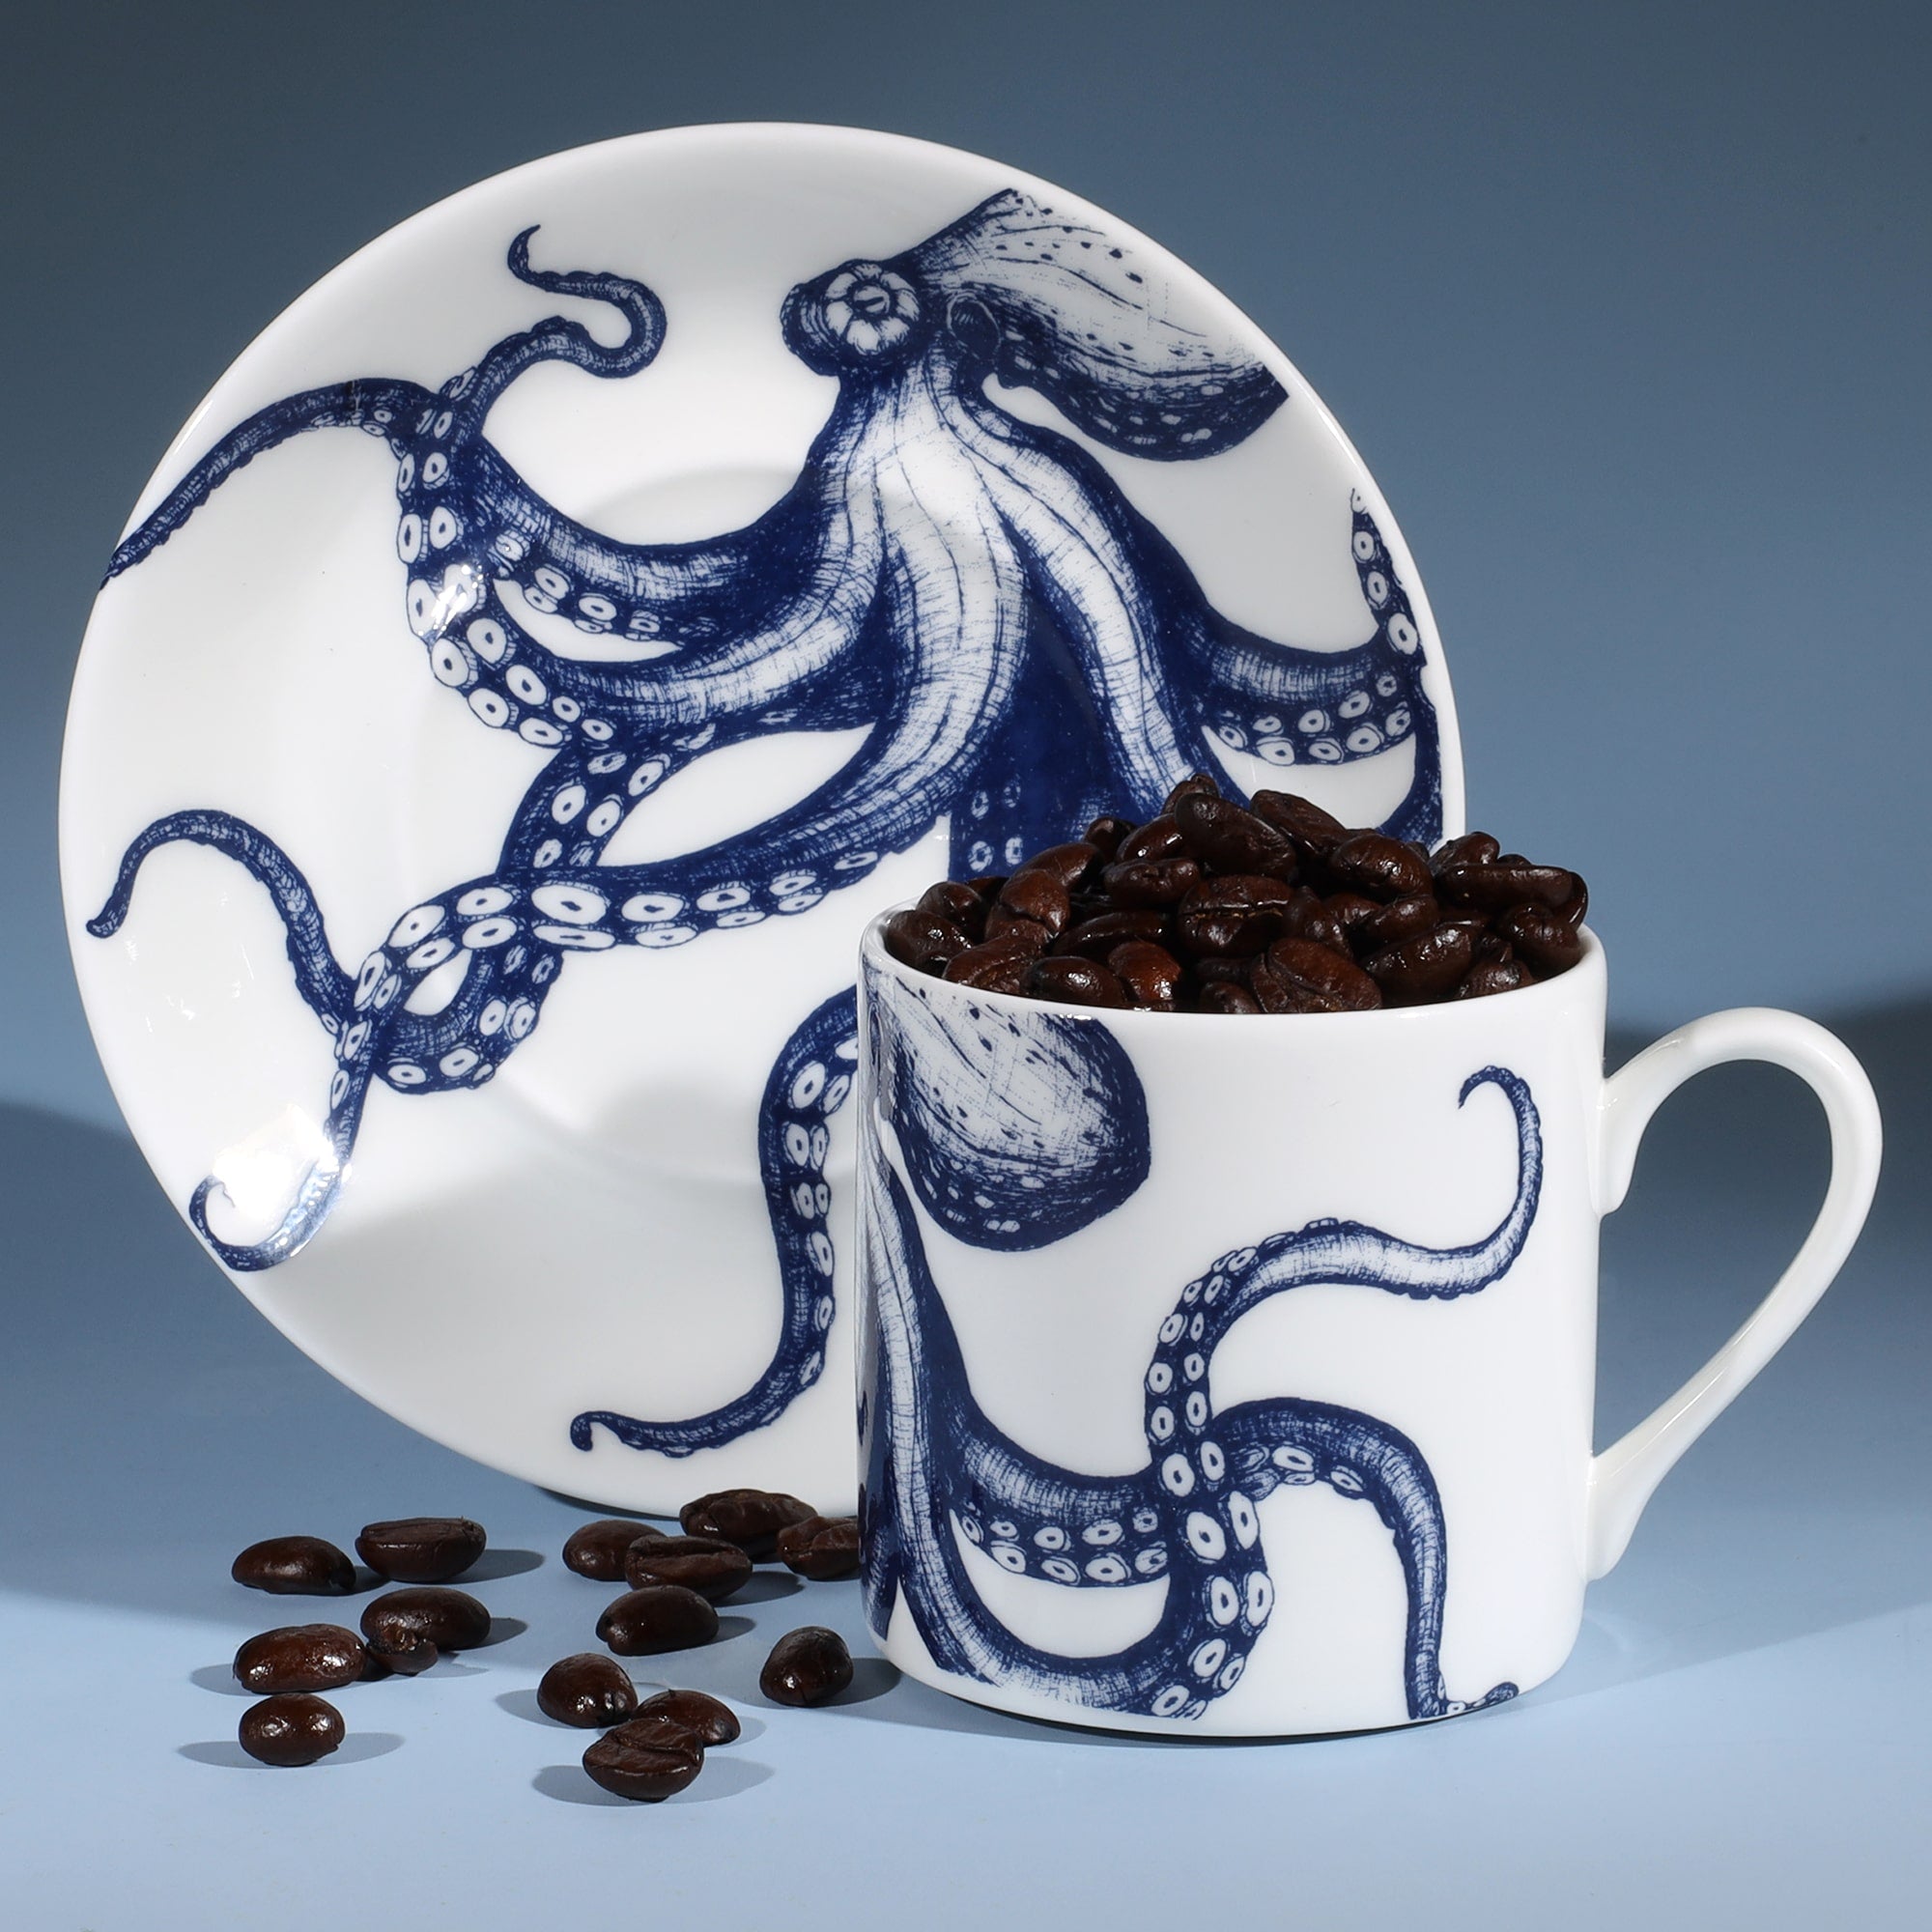 Bone China white espresso cup in hand drawn illustration in our Octopus design in Navy with matching saucer.Saucer is standing on its side with the coffee cup in front filled with coffee beans